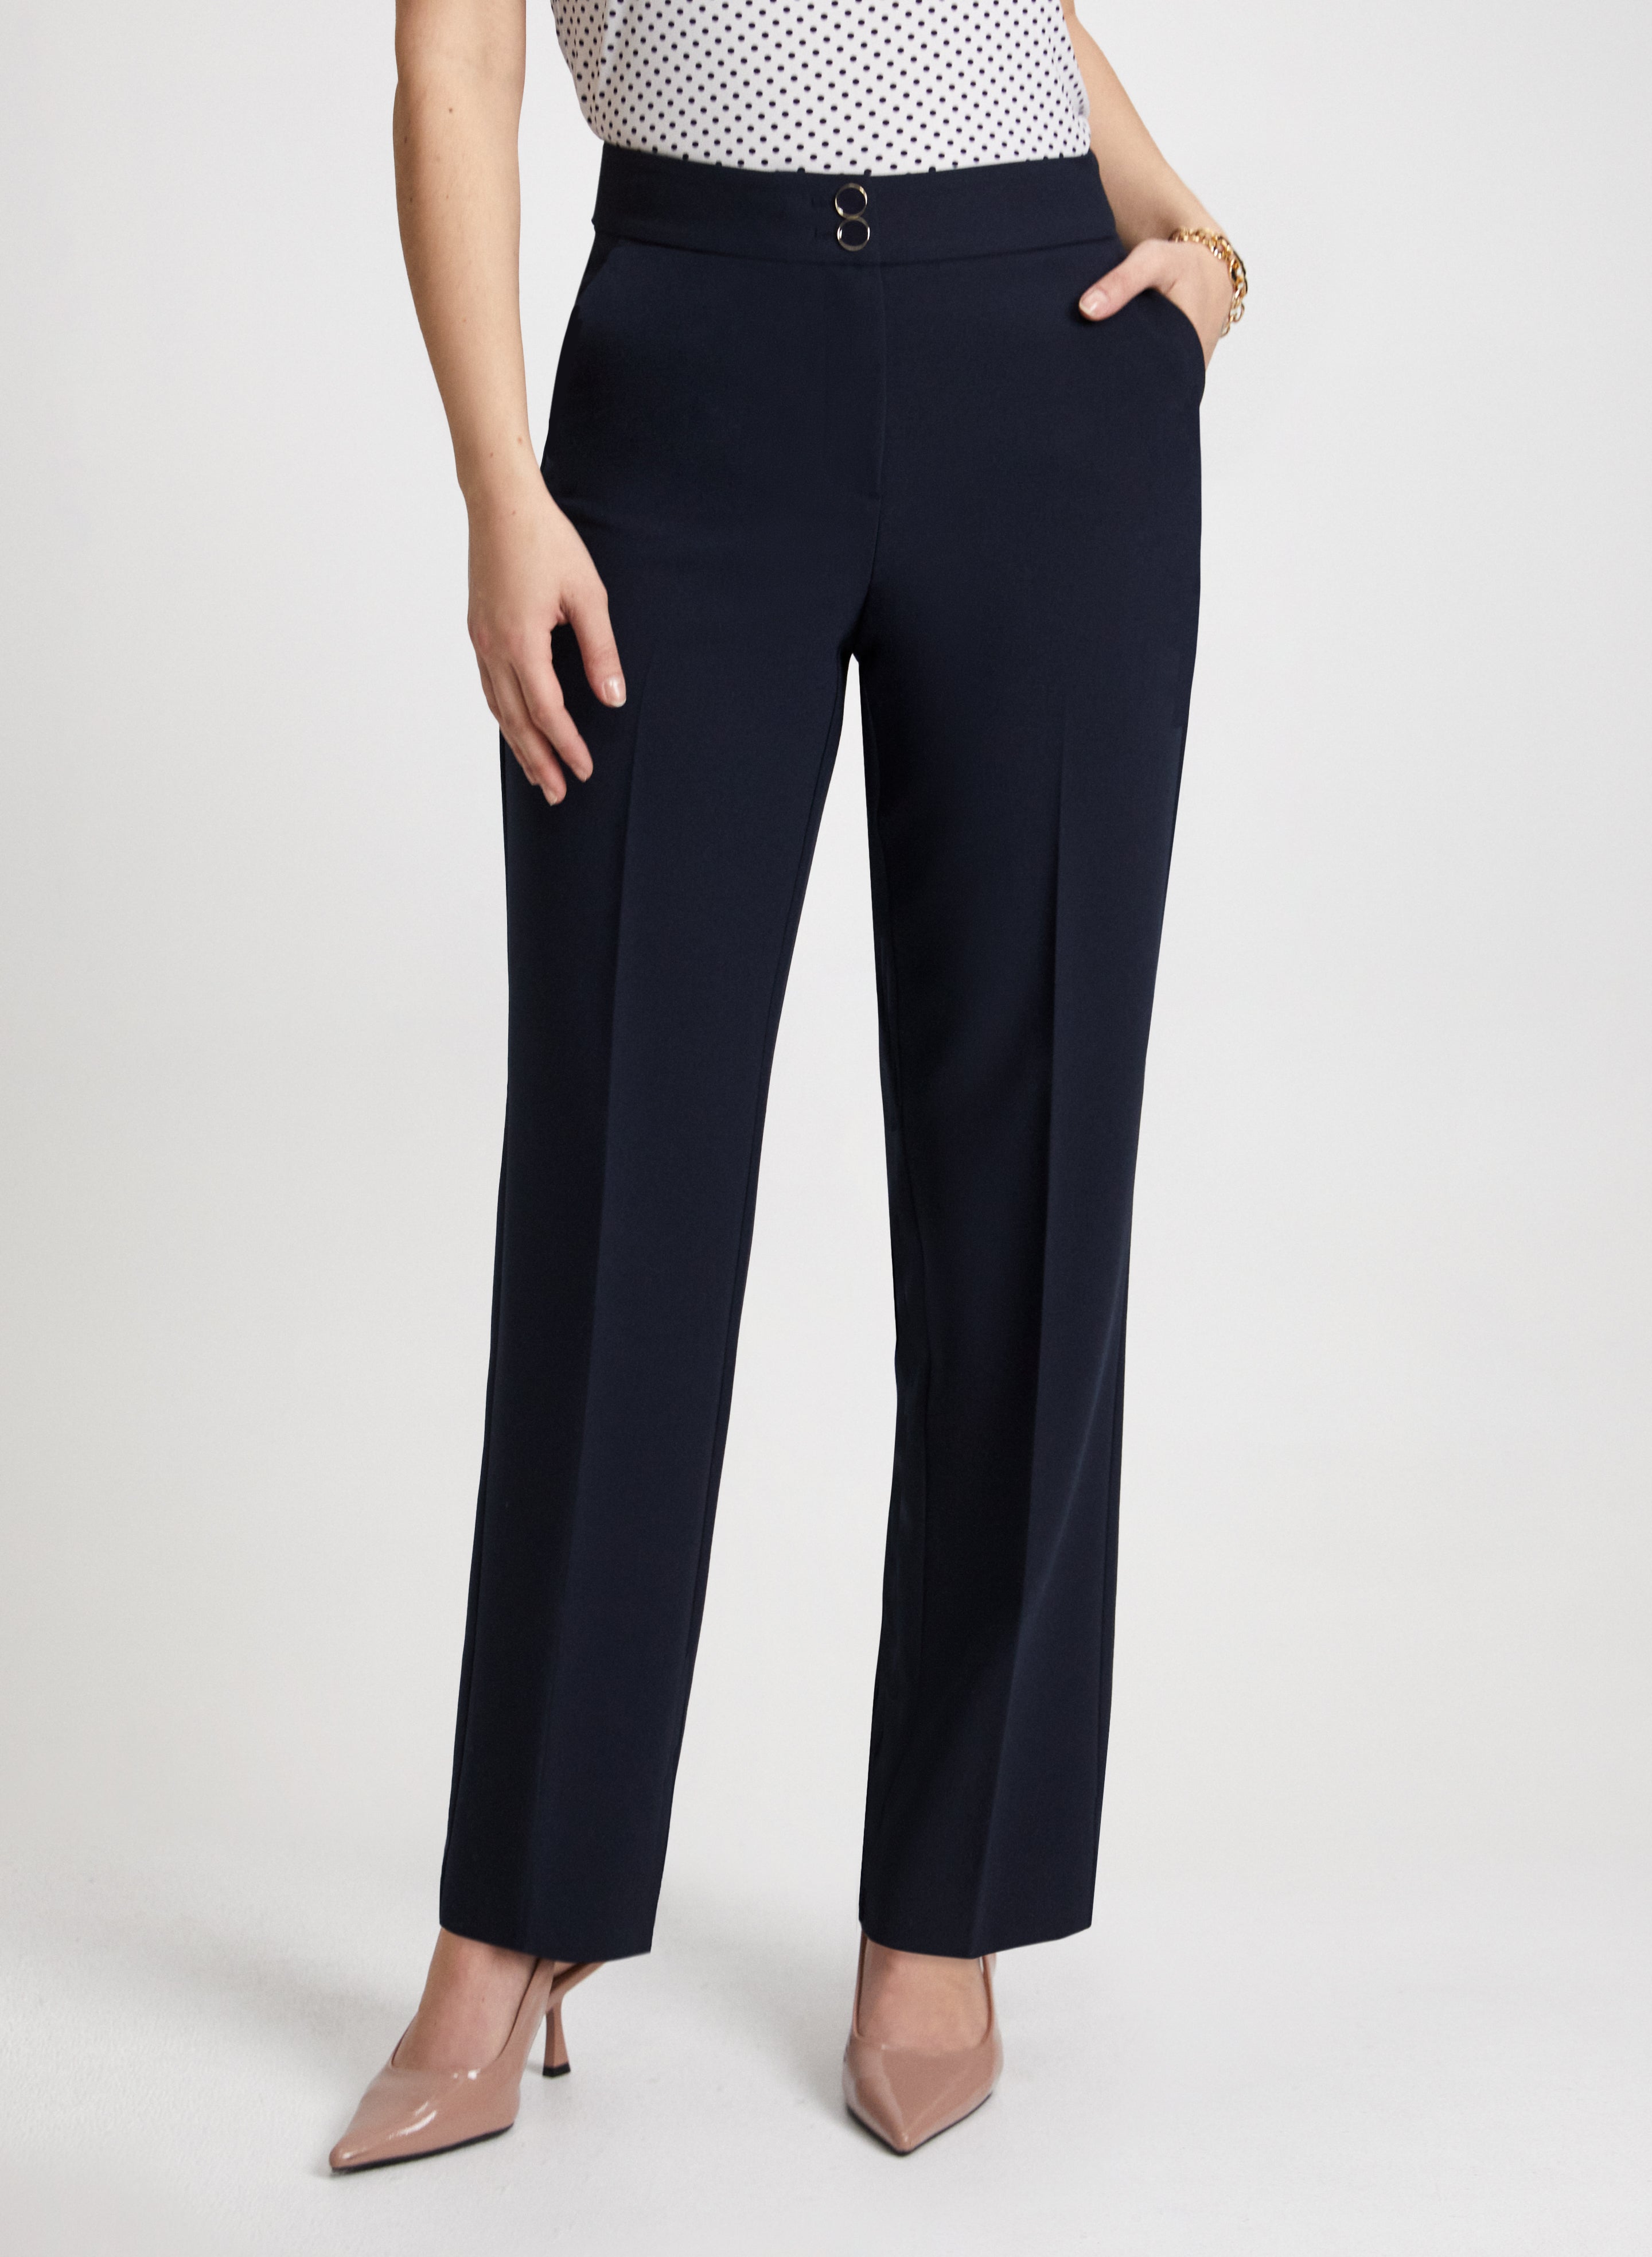 Stylish Ankle Length Trousers for Women